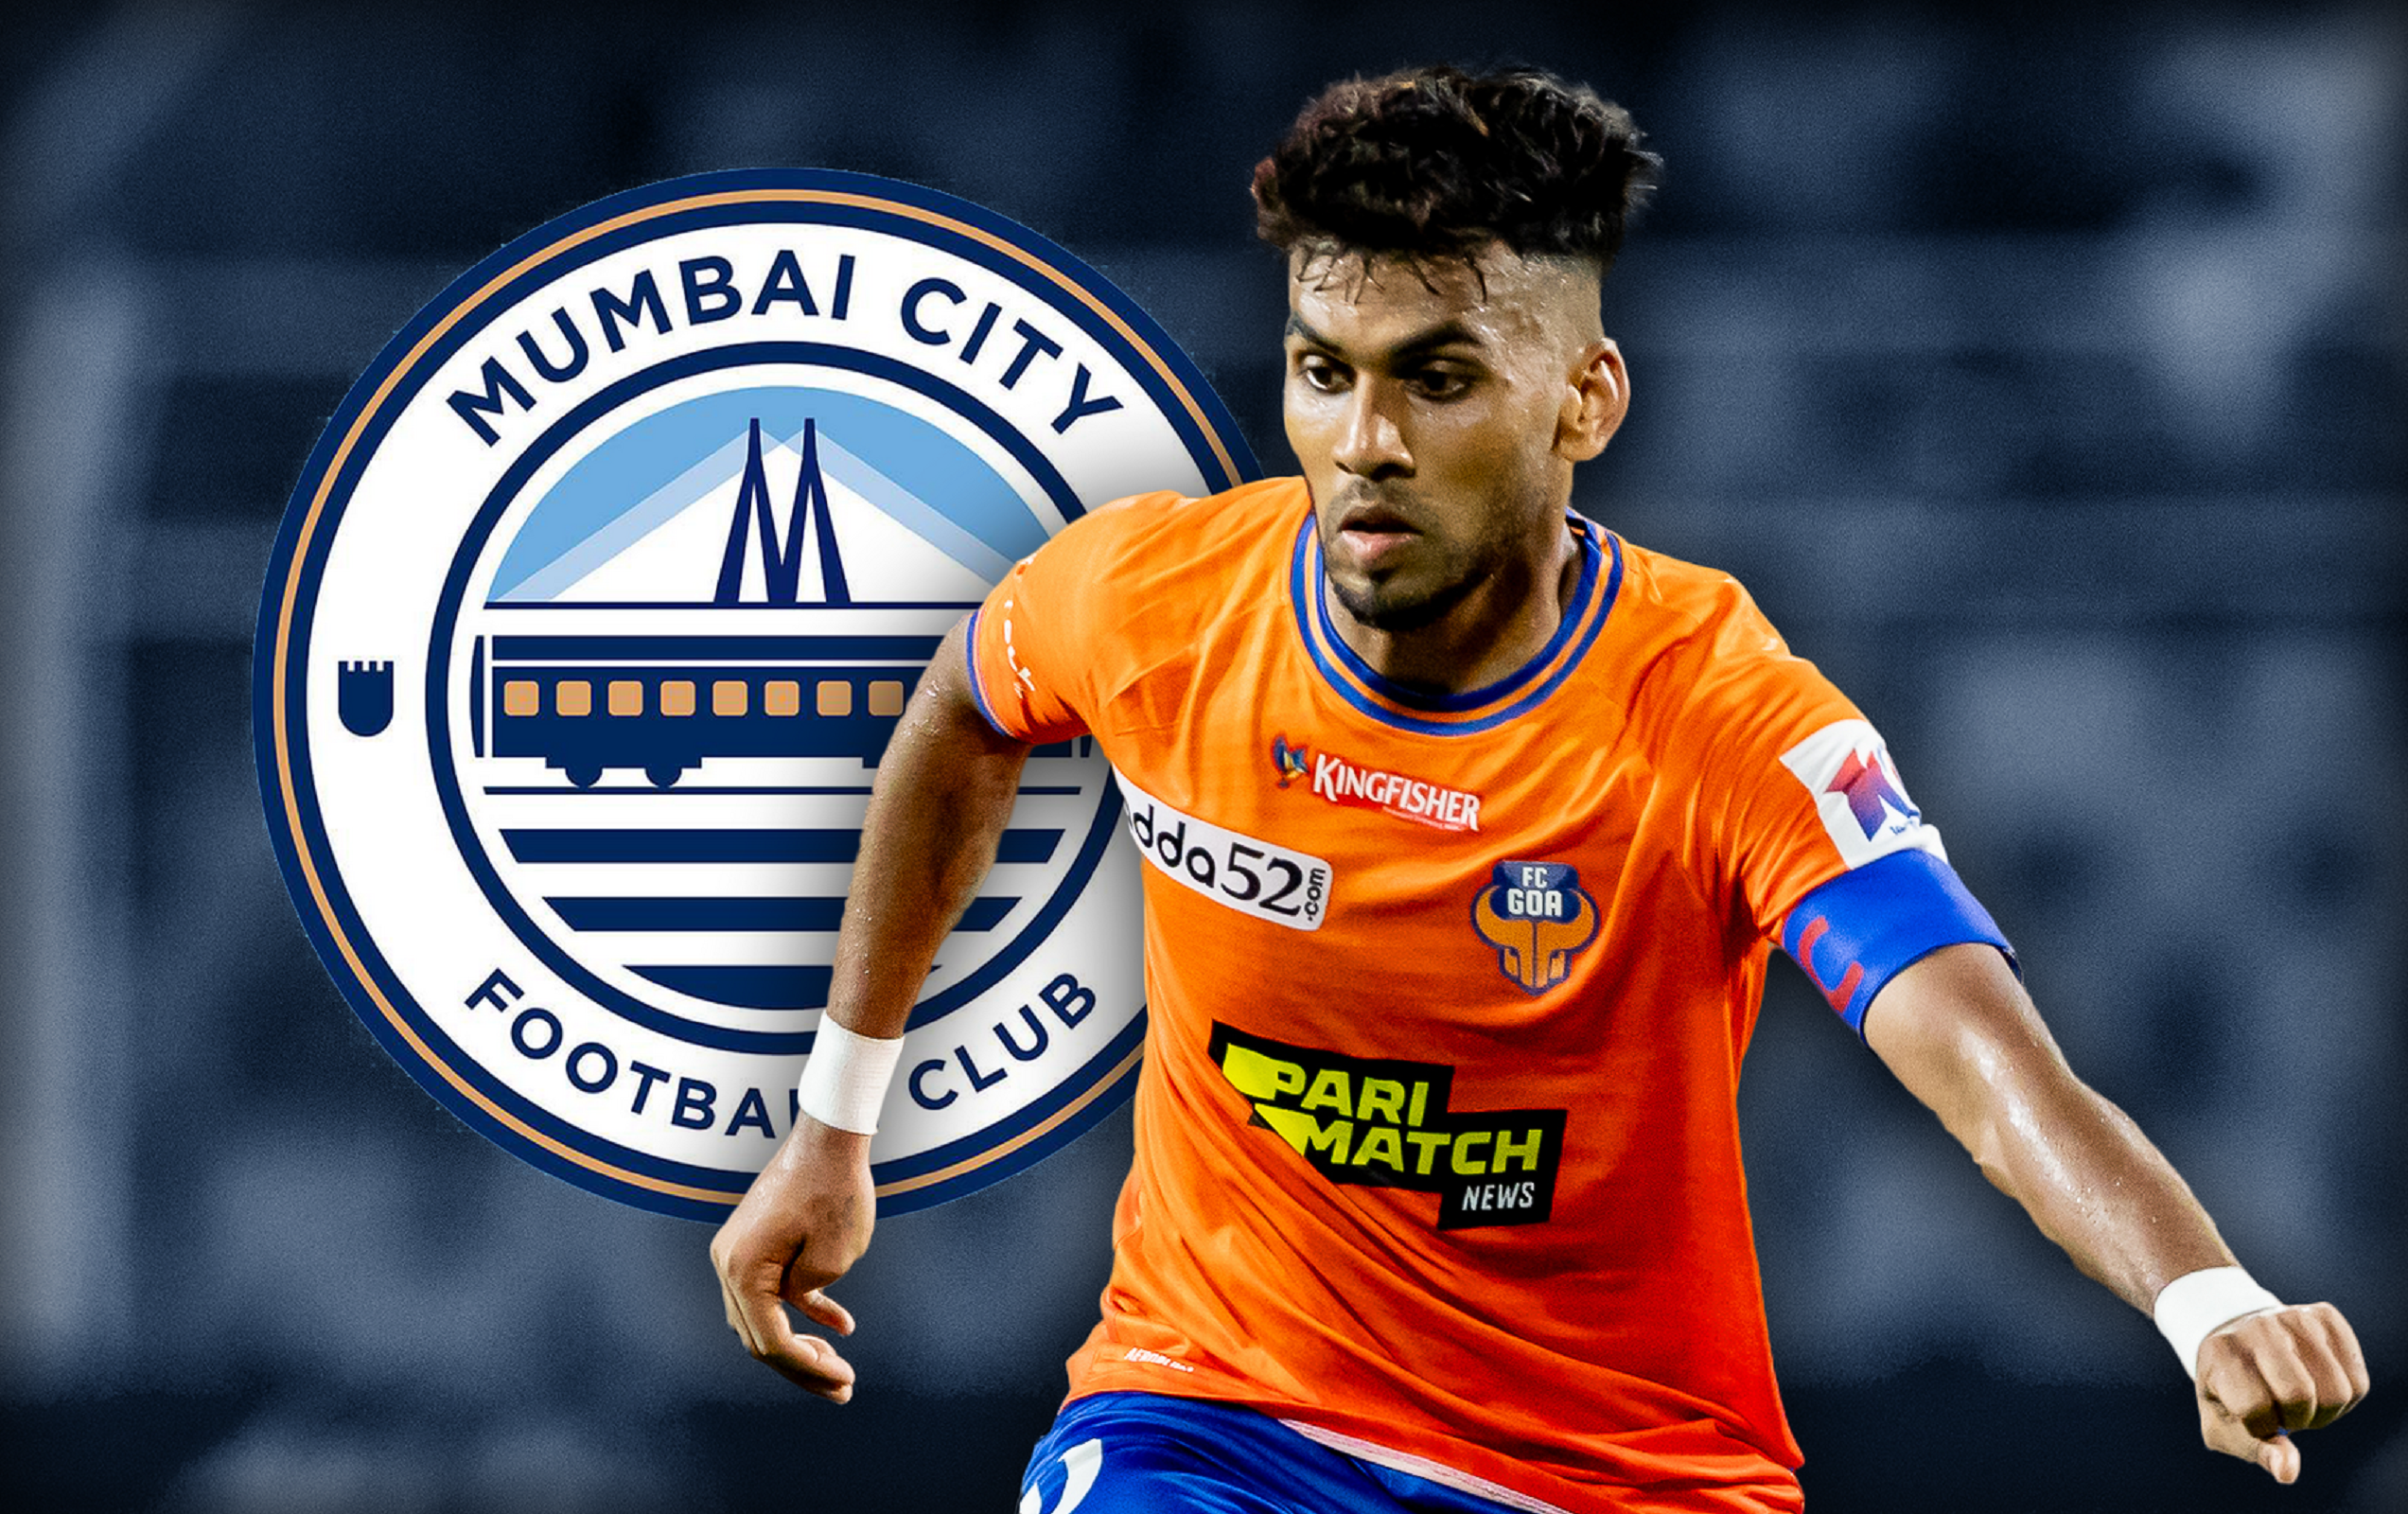 Report: Why Brandon Fernandes chose to join Mumbai City FC